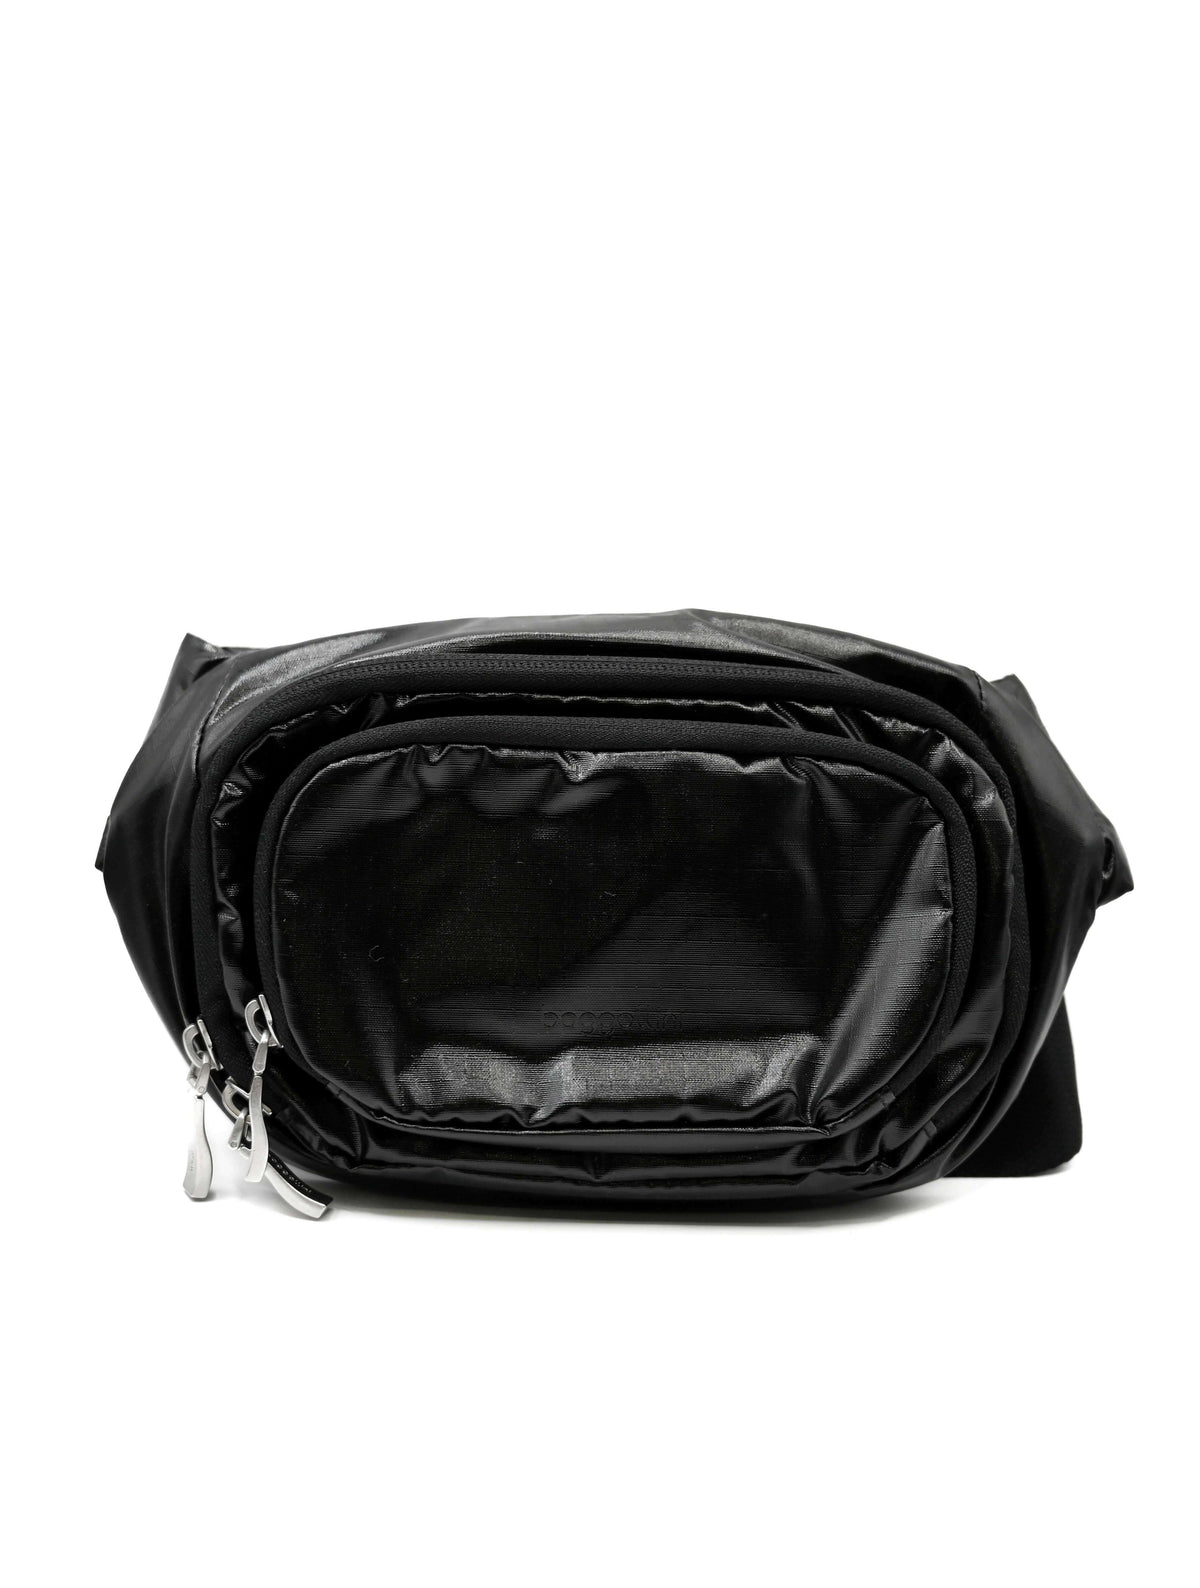 Baggallini On The Go Belt Bag Waist Pack in Black Gloss Ripstop